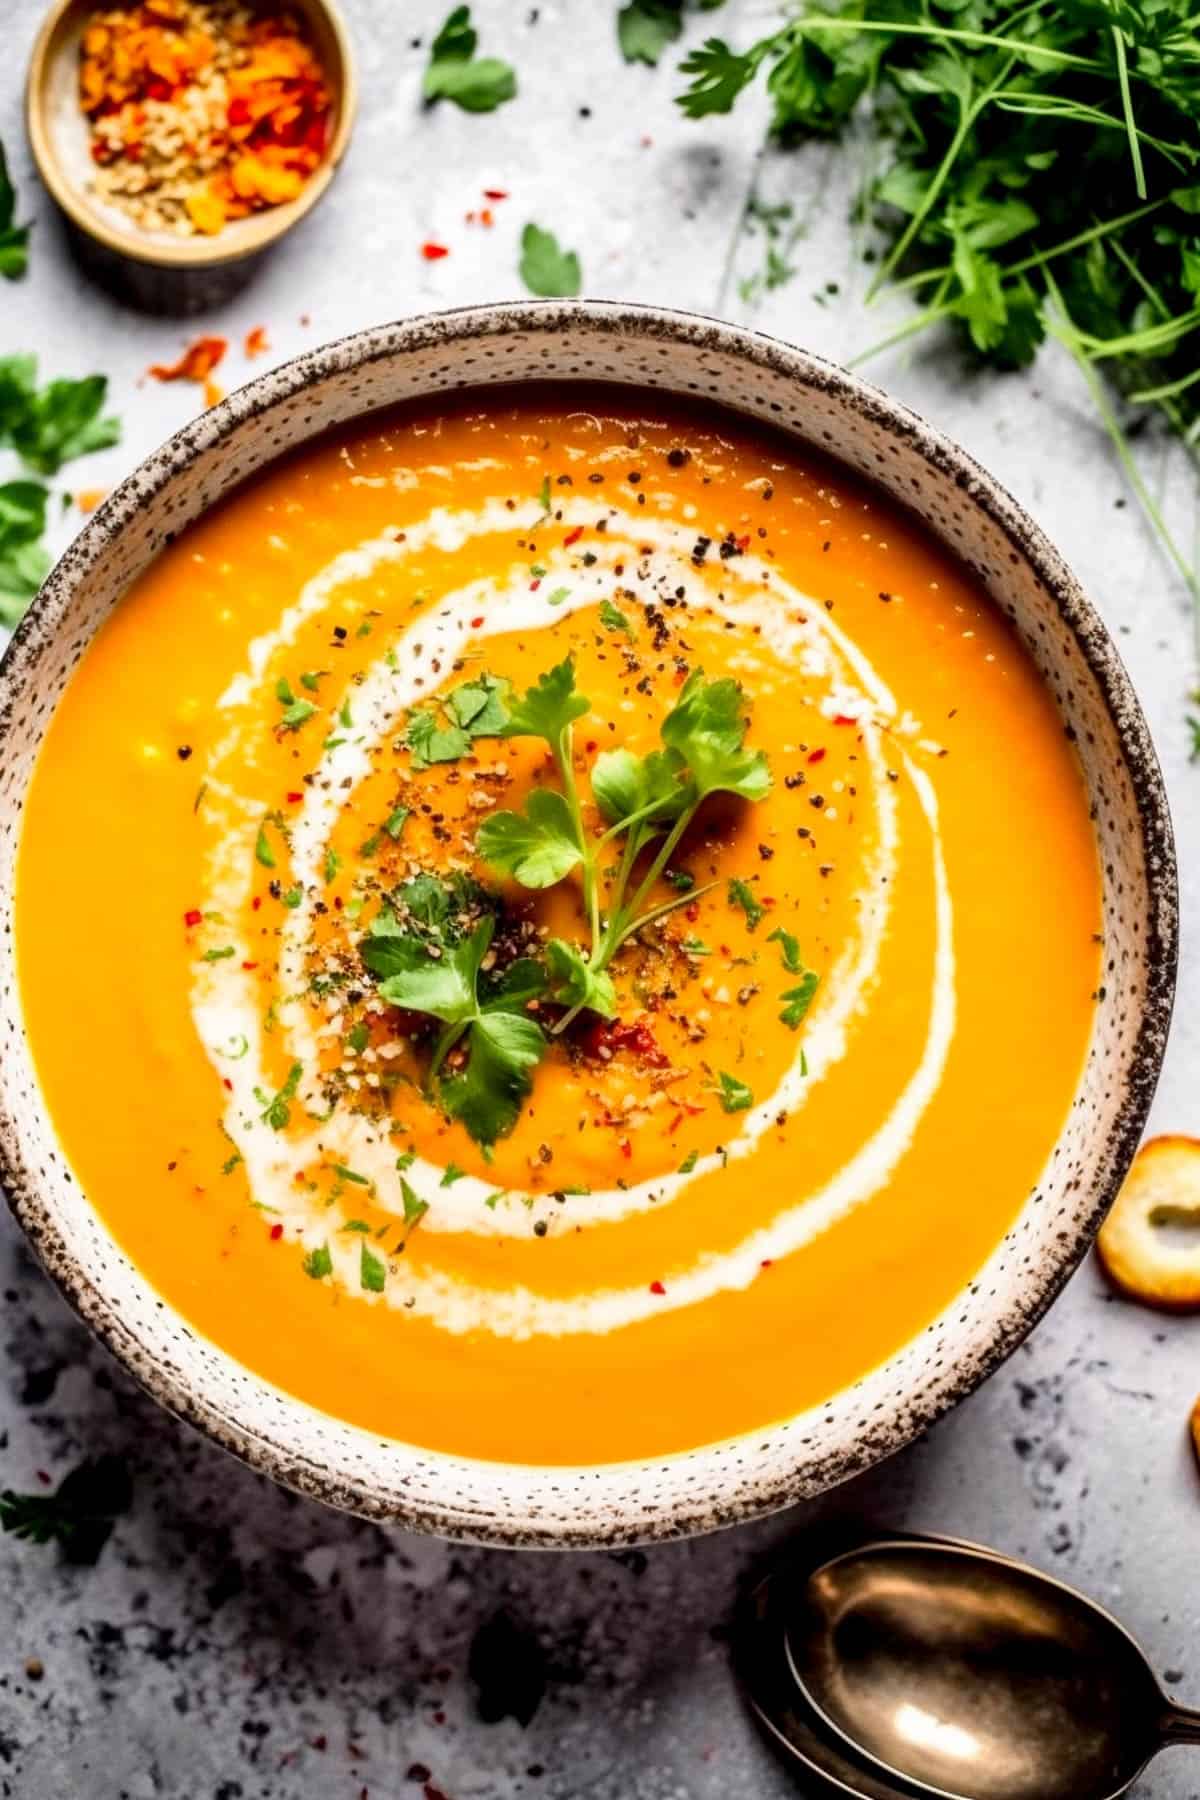 Carrot and coriander soup with fresh coriander on top.